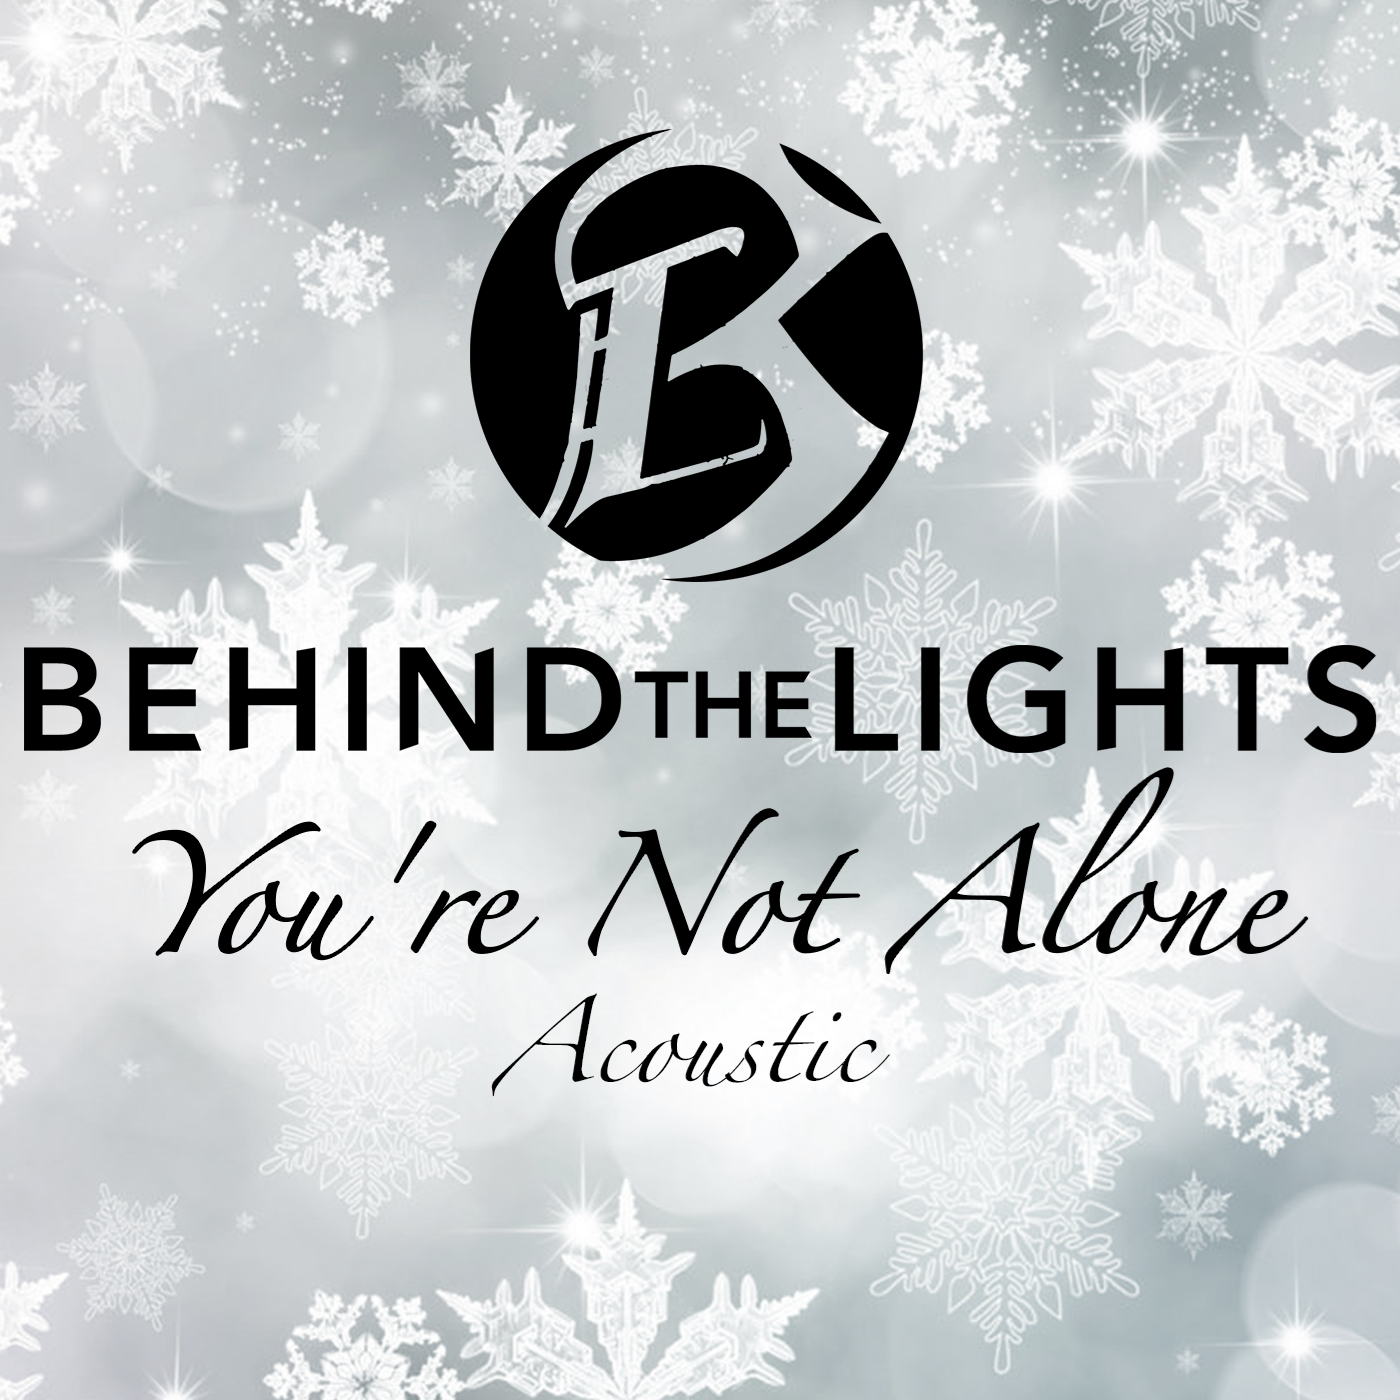 You're Not Alone (Acoustic Version)